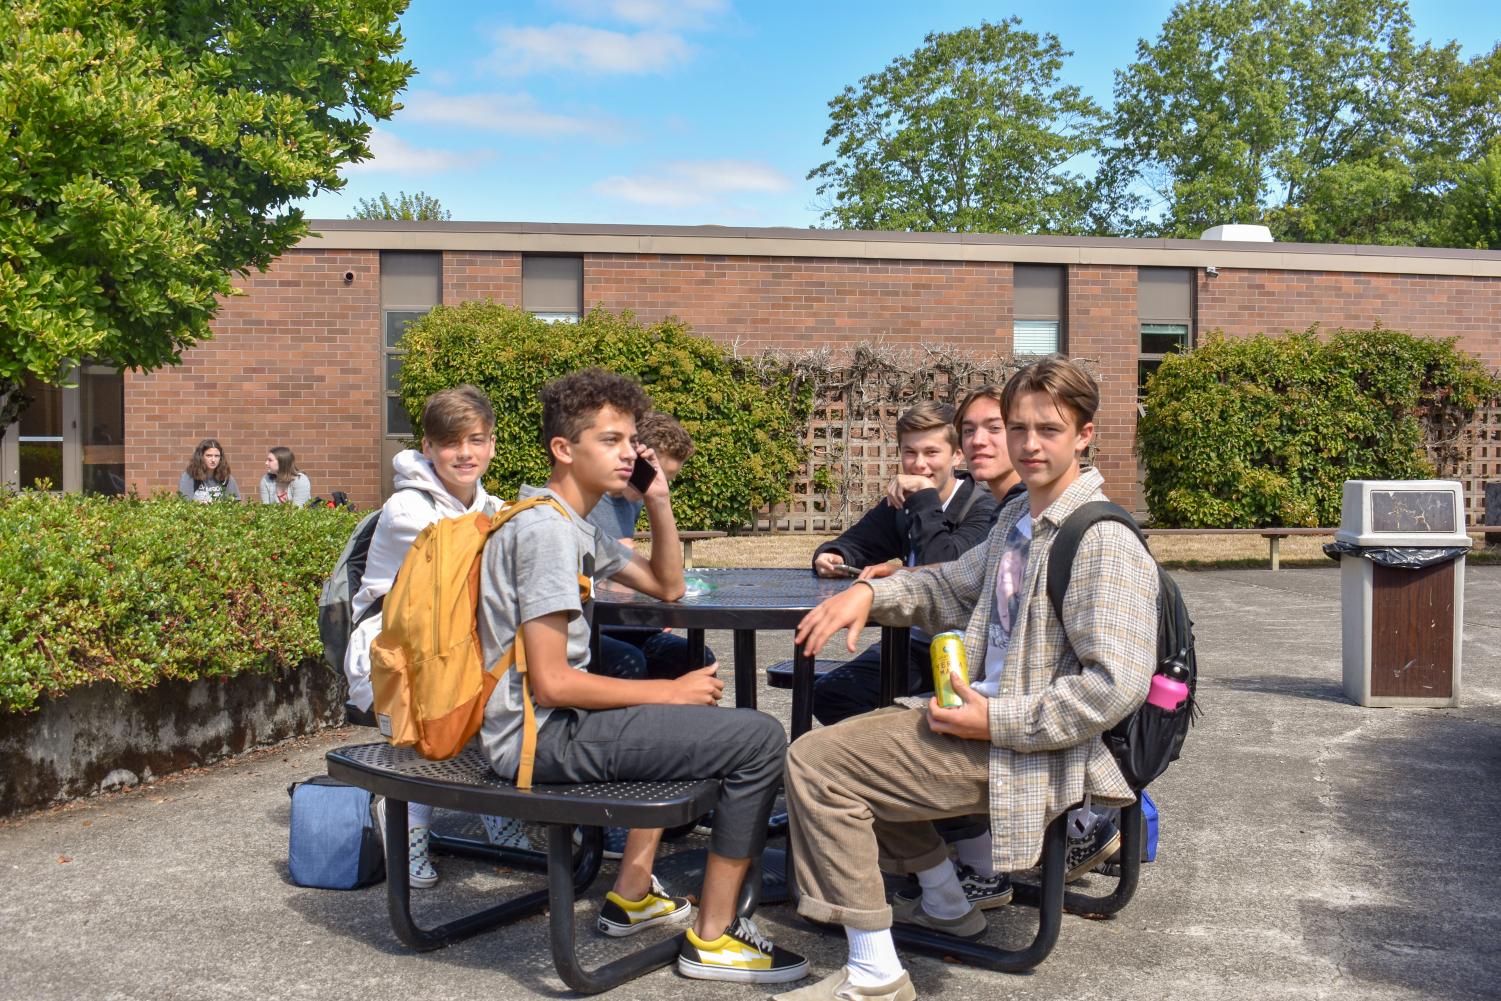 La+Salle+Welcomes+Back+Students+for+the+2019-20+School+Year